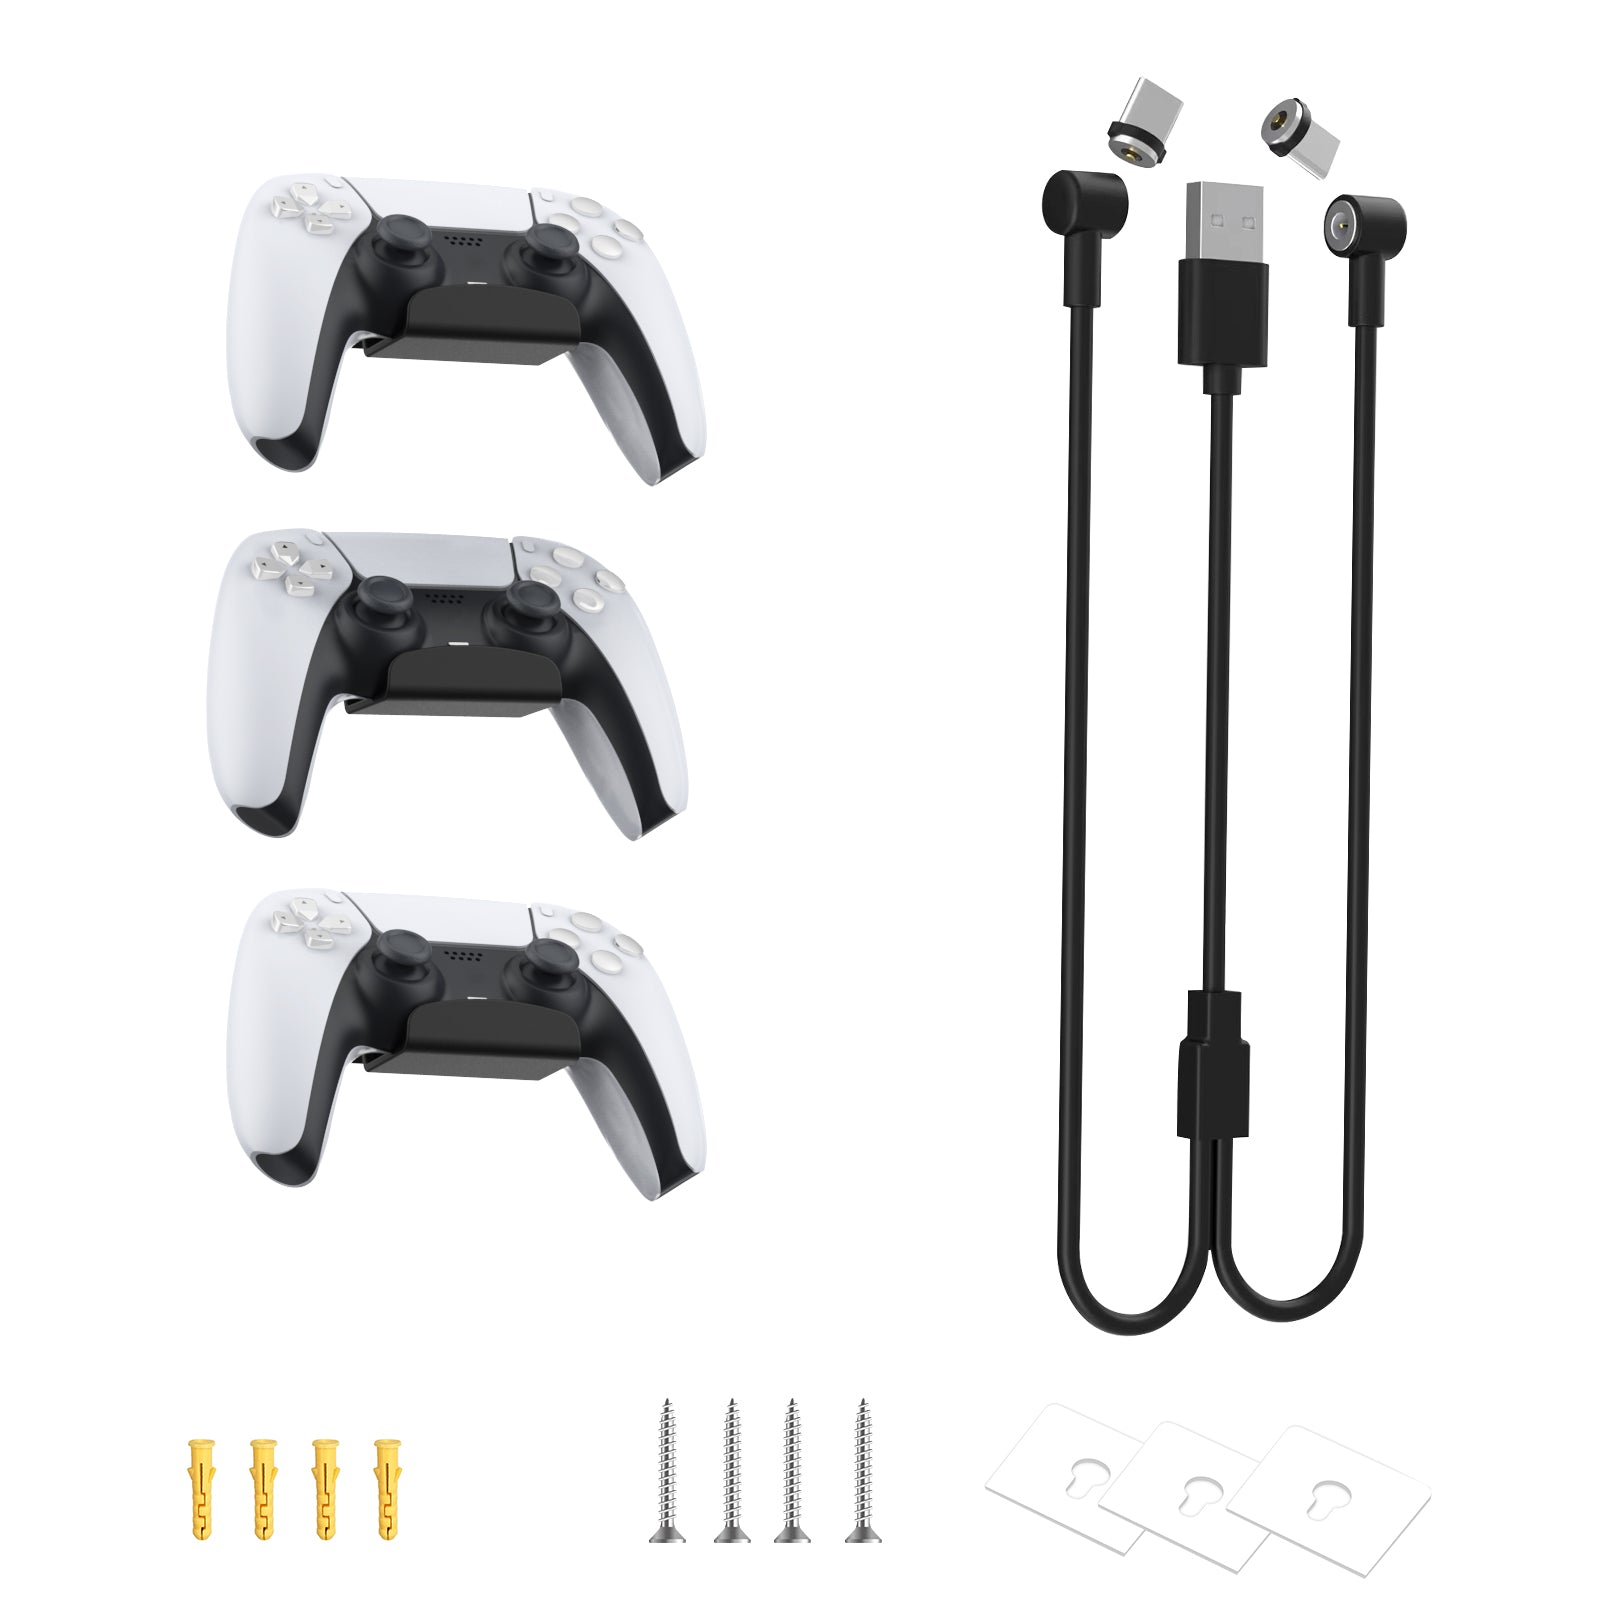 The Wall Mount Set for PSVR2 Controllers includes a steel controller holder and a headphone hanger